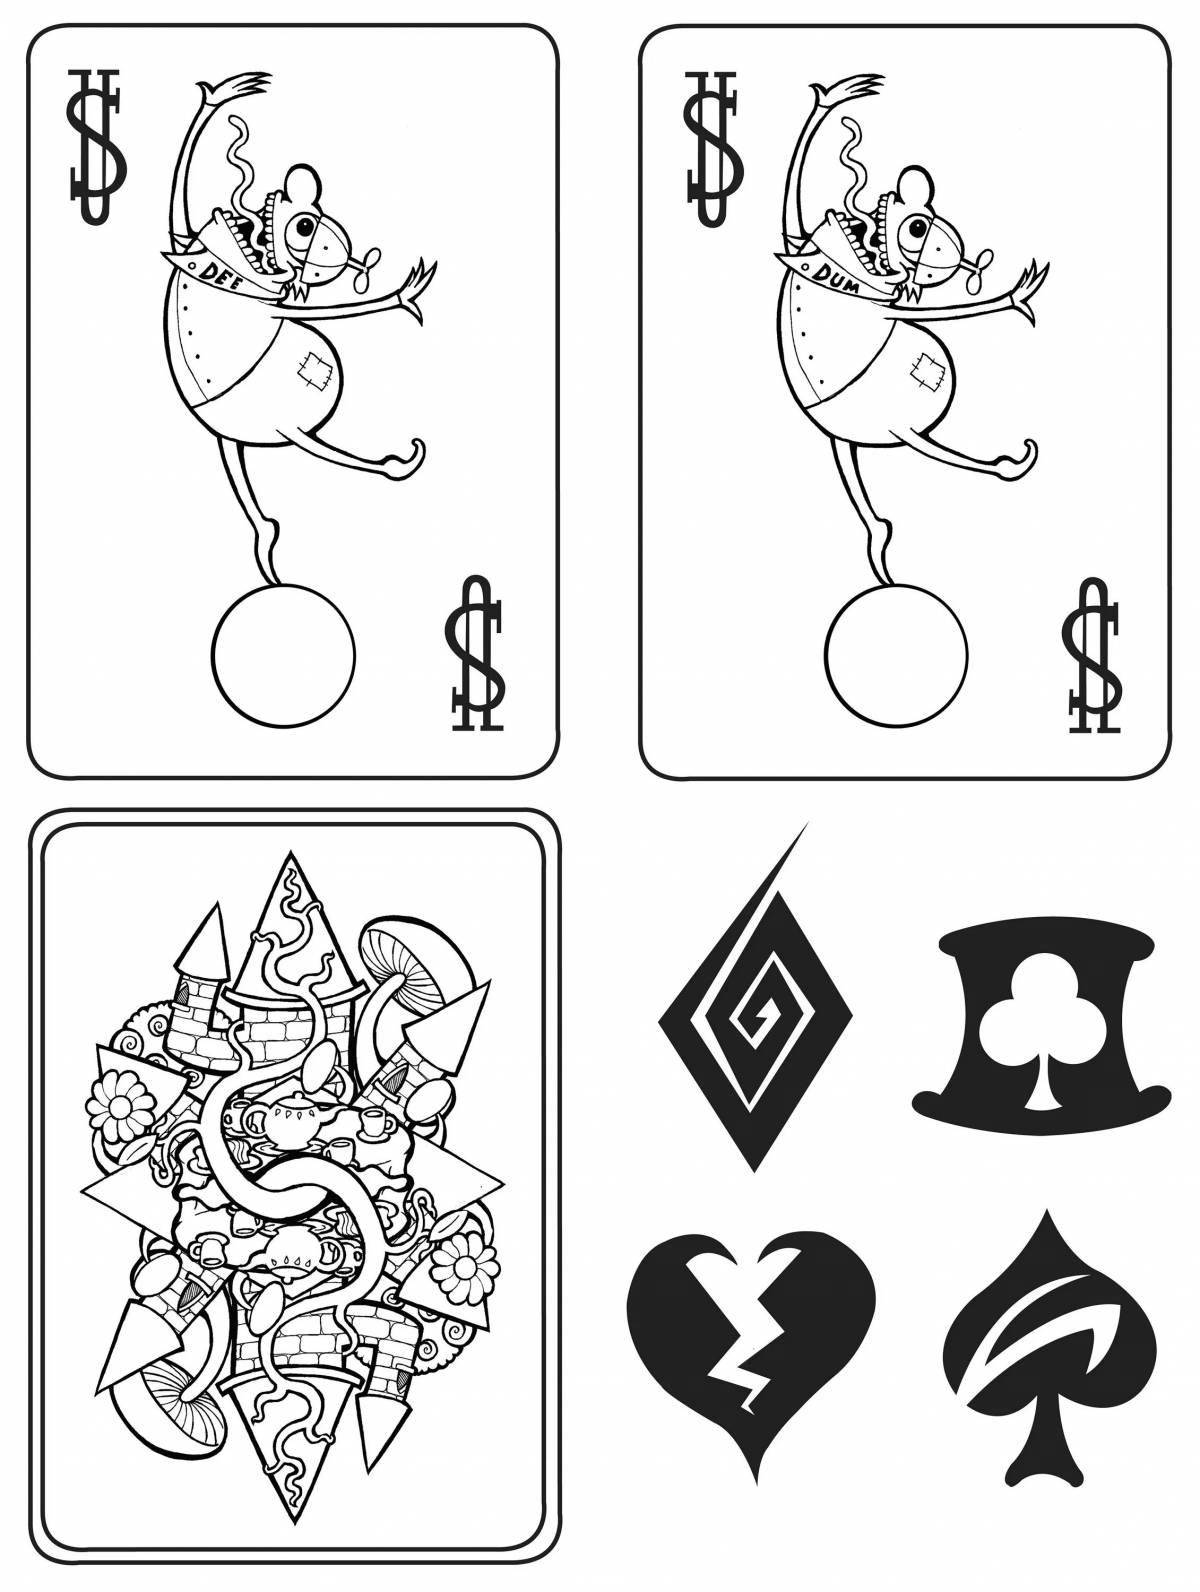 Playing cards #17